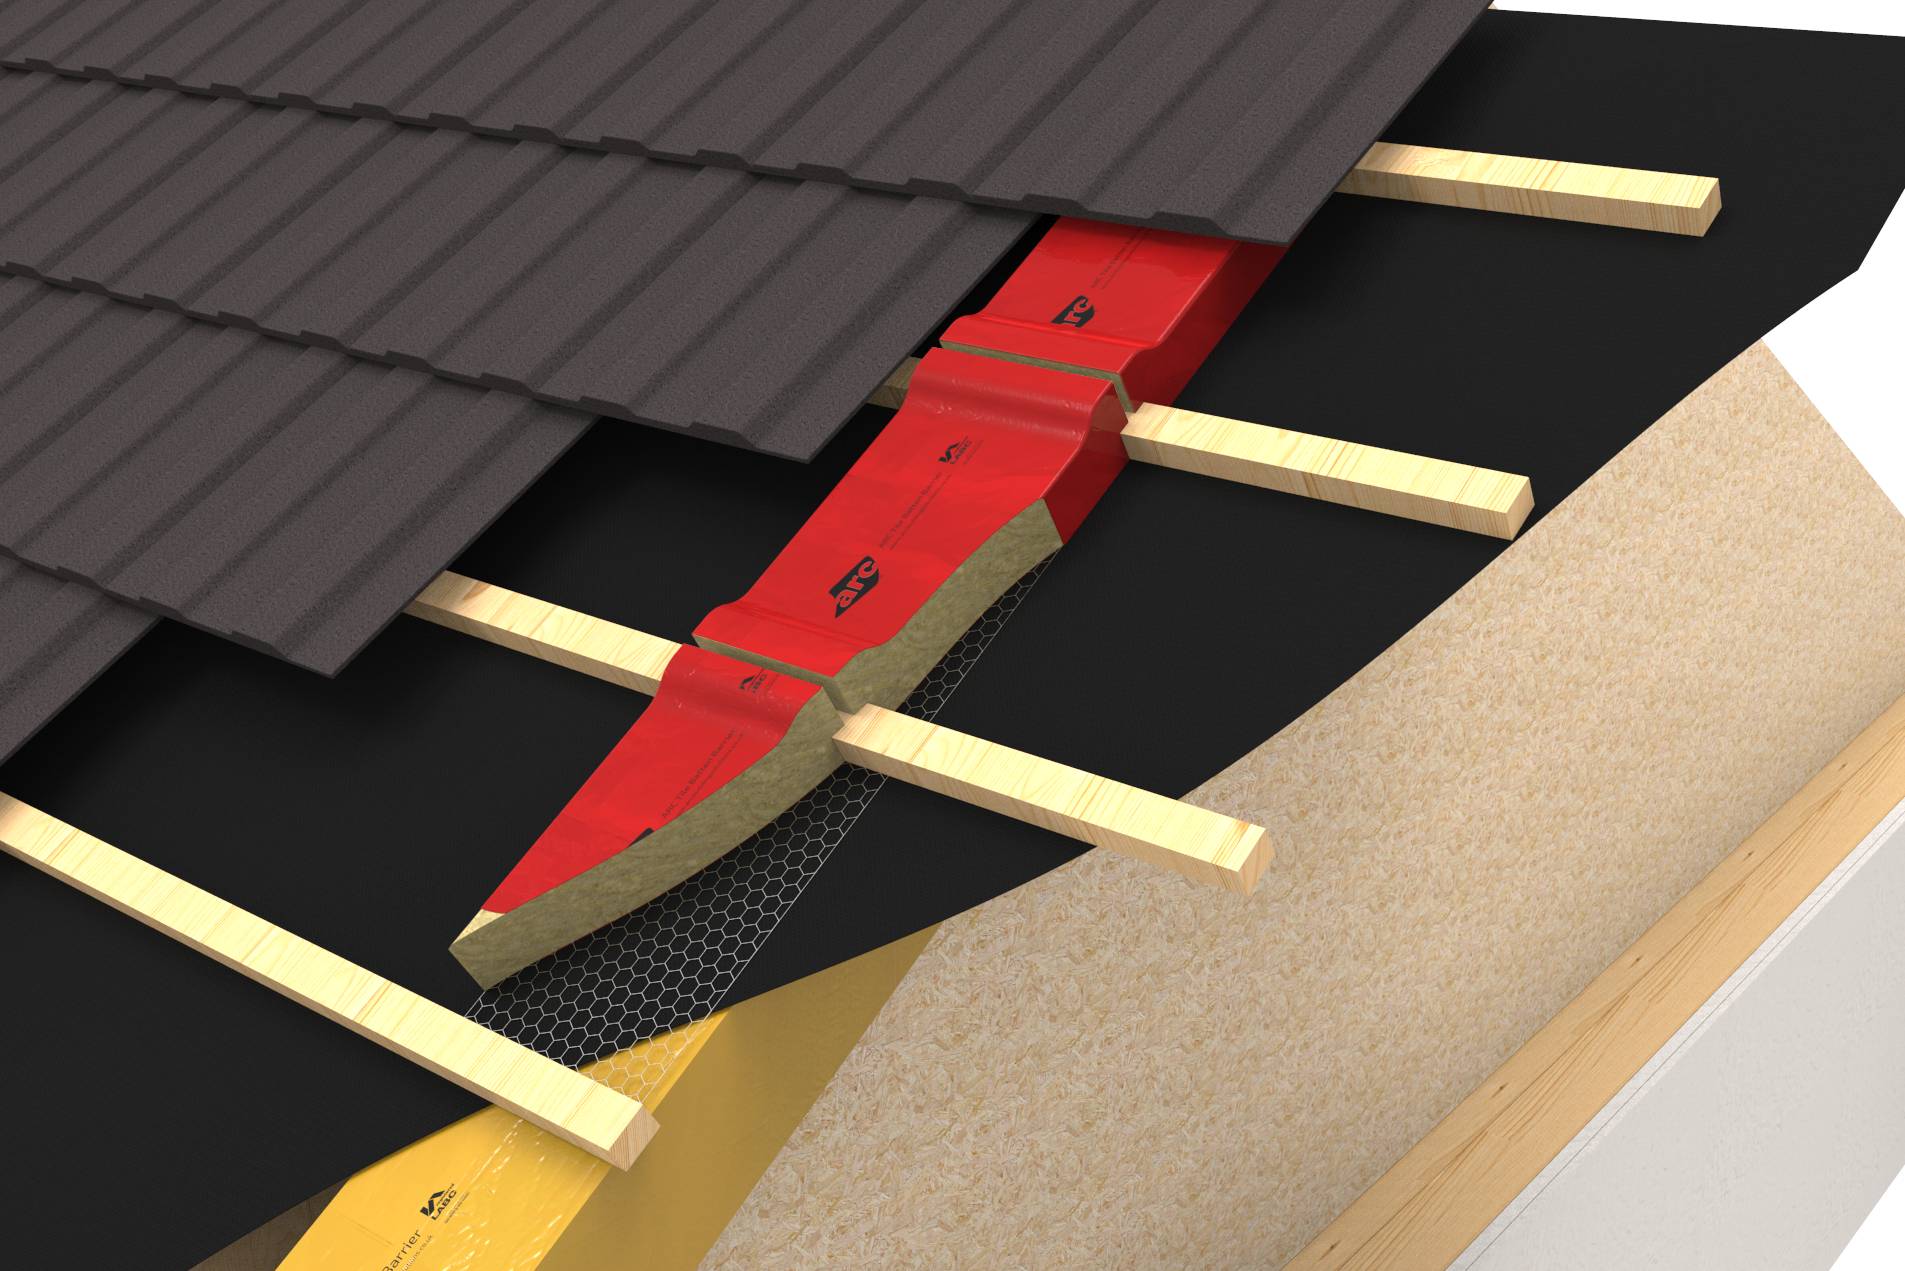 Wired Tile Batten Barrier - Mineral Wool fire stopping